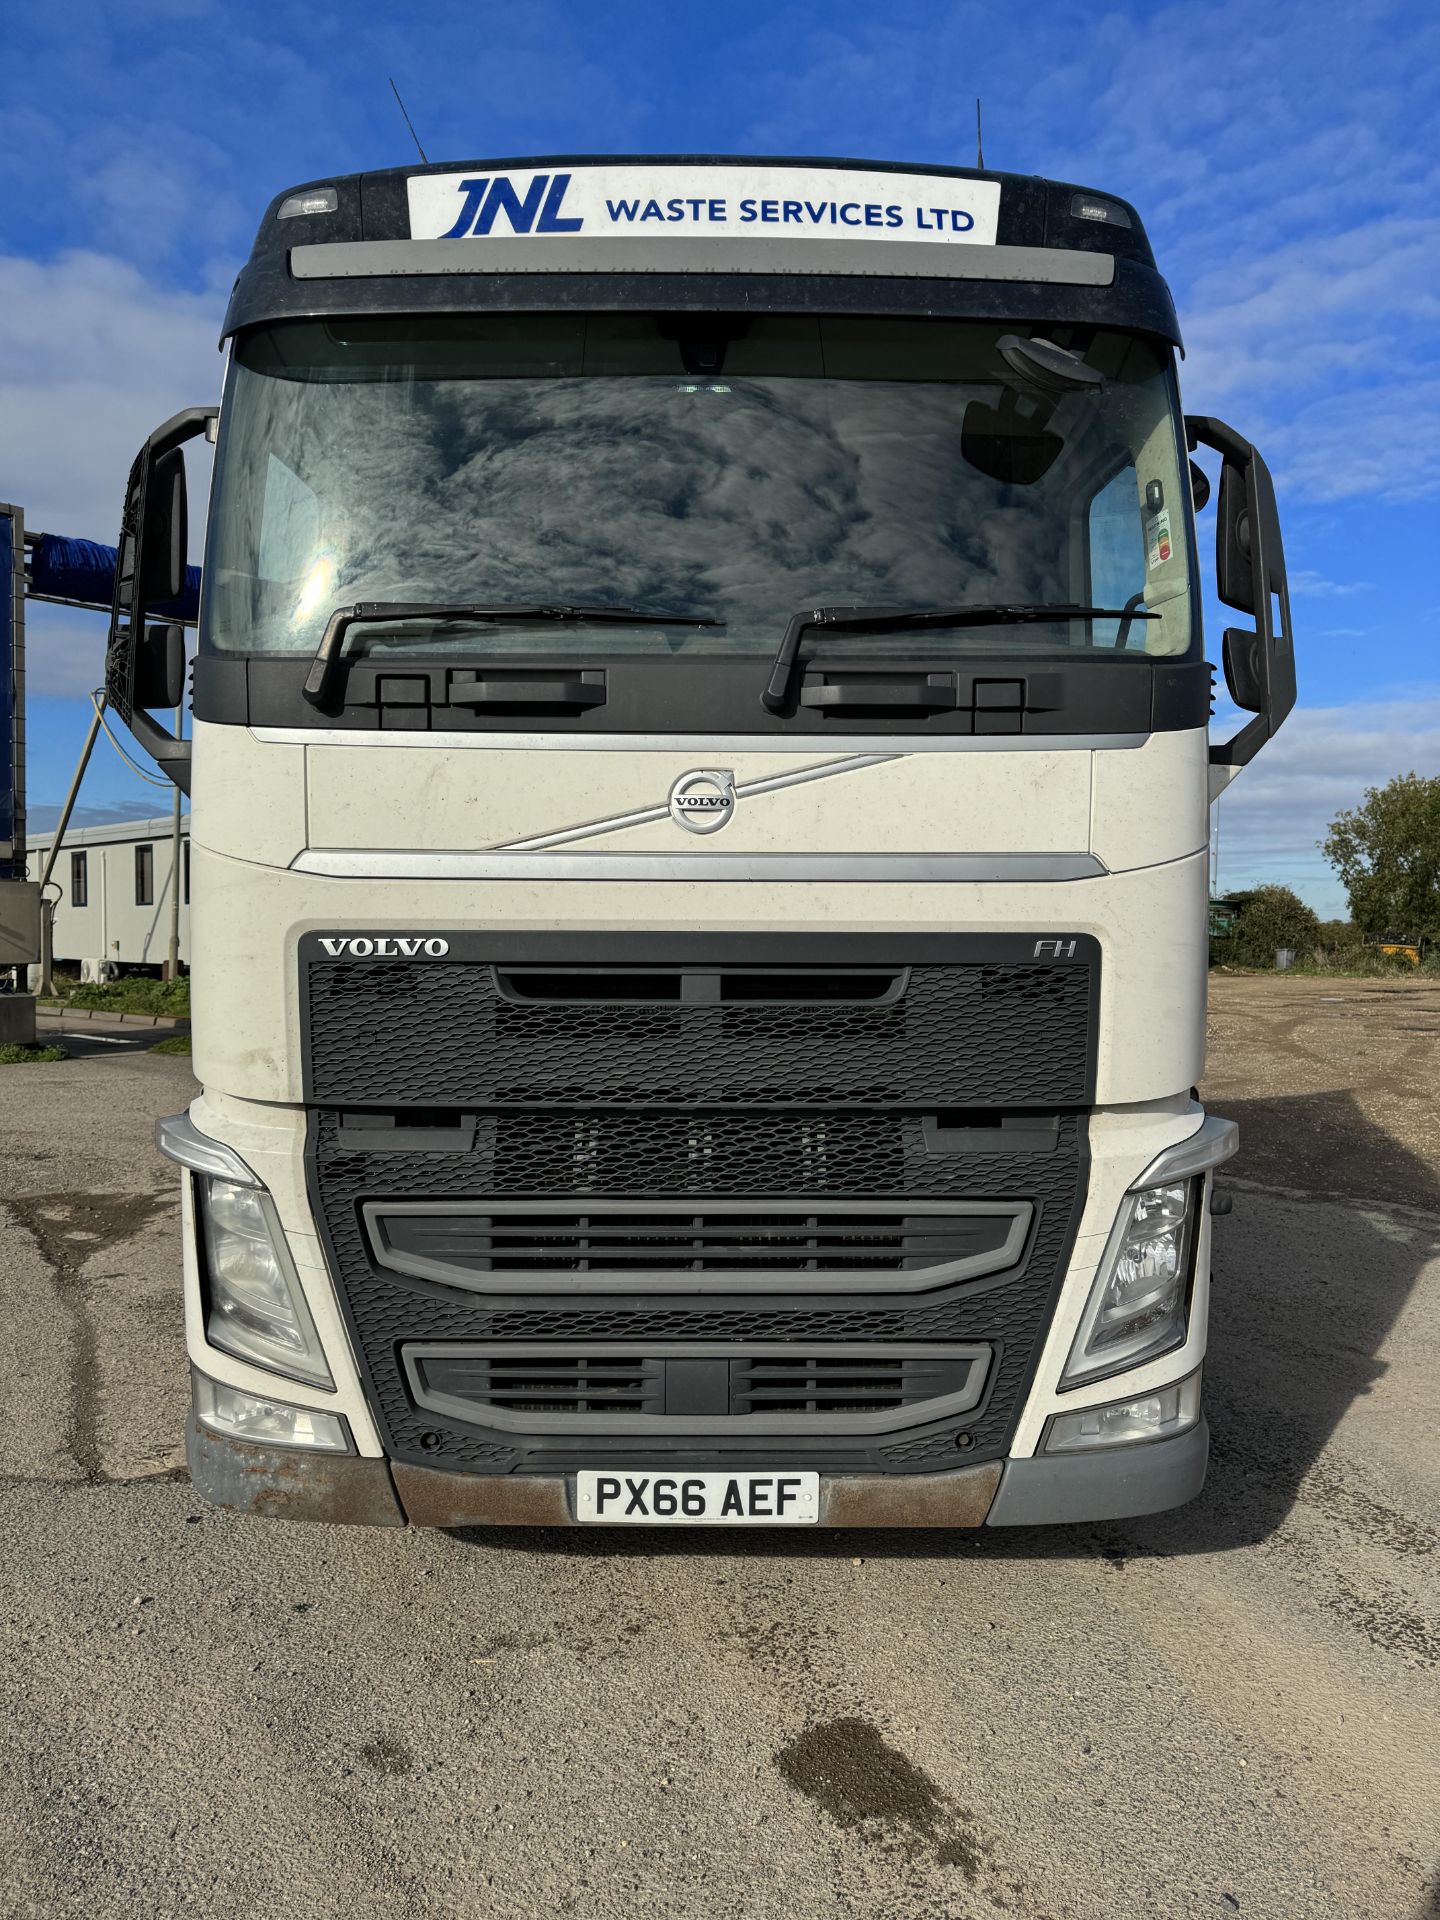 2016 - Volvo FH460 6 x 2 Euro 6 Mid Lift Tractor Unit - Image 3 of 47